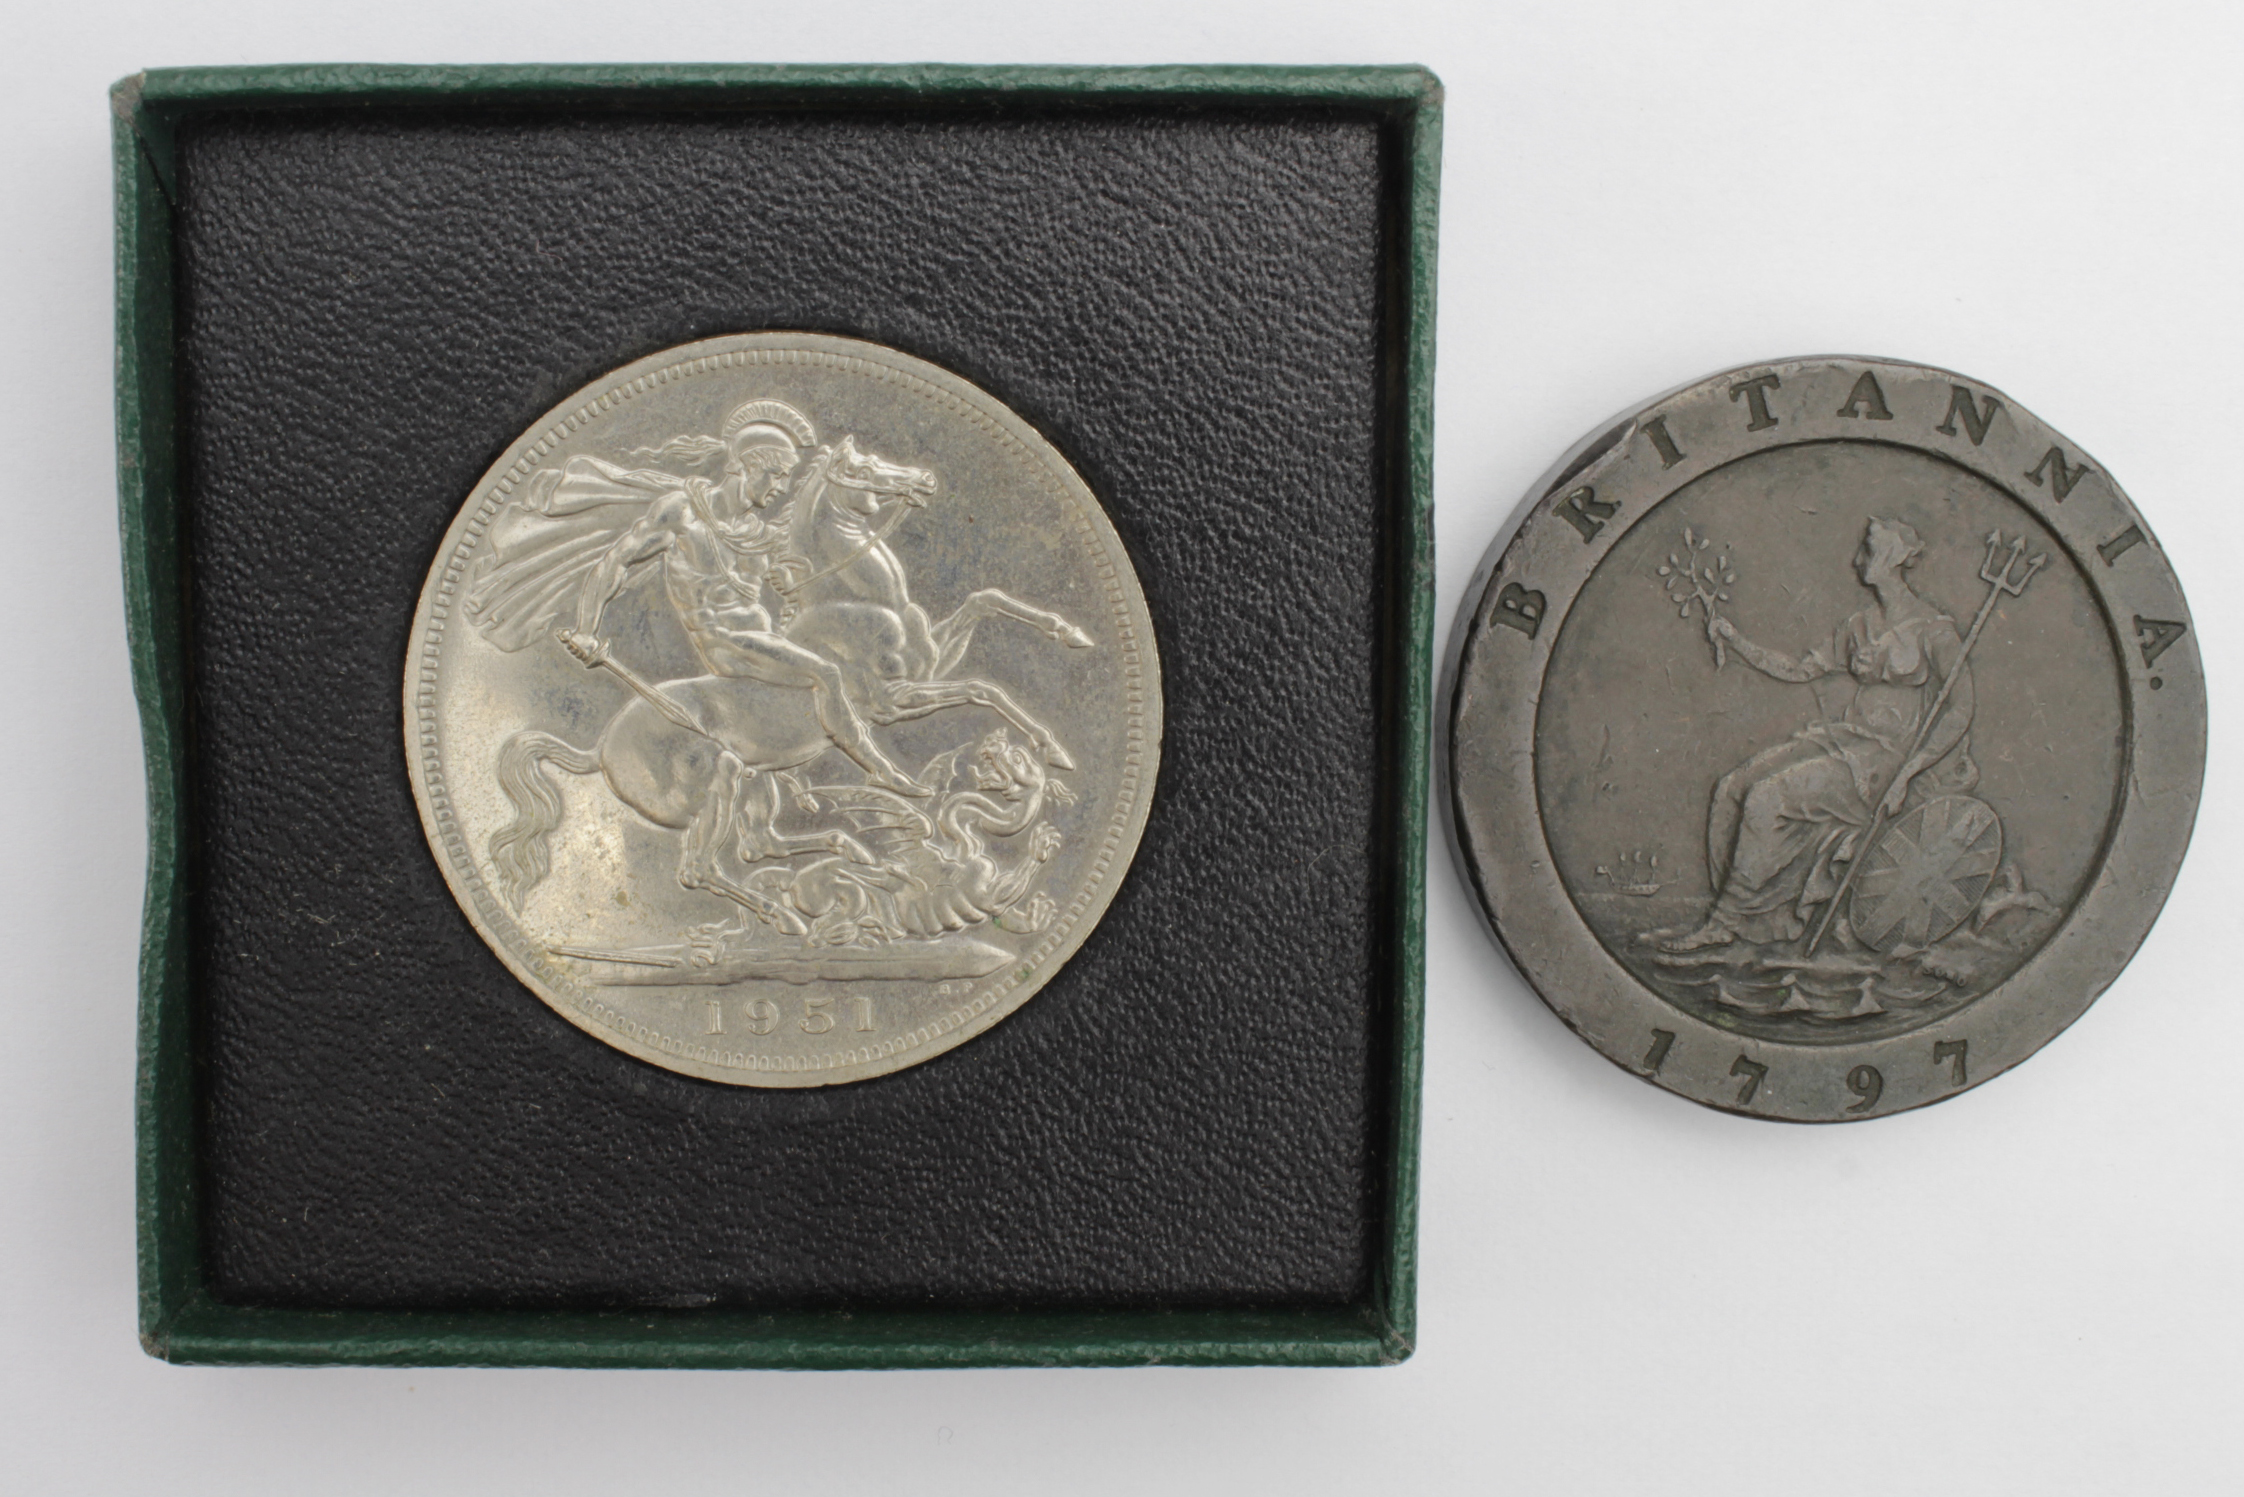 GB Coins (2): Twopence 1797 copper "cartwheel" nVF, and a Festival of Britain Crown 1951 EF in